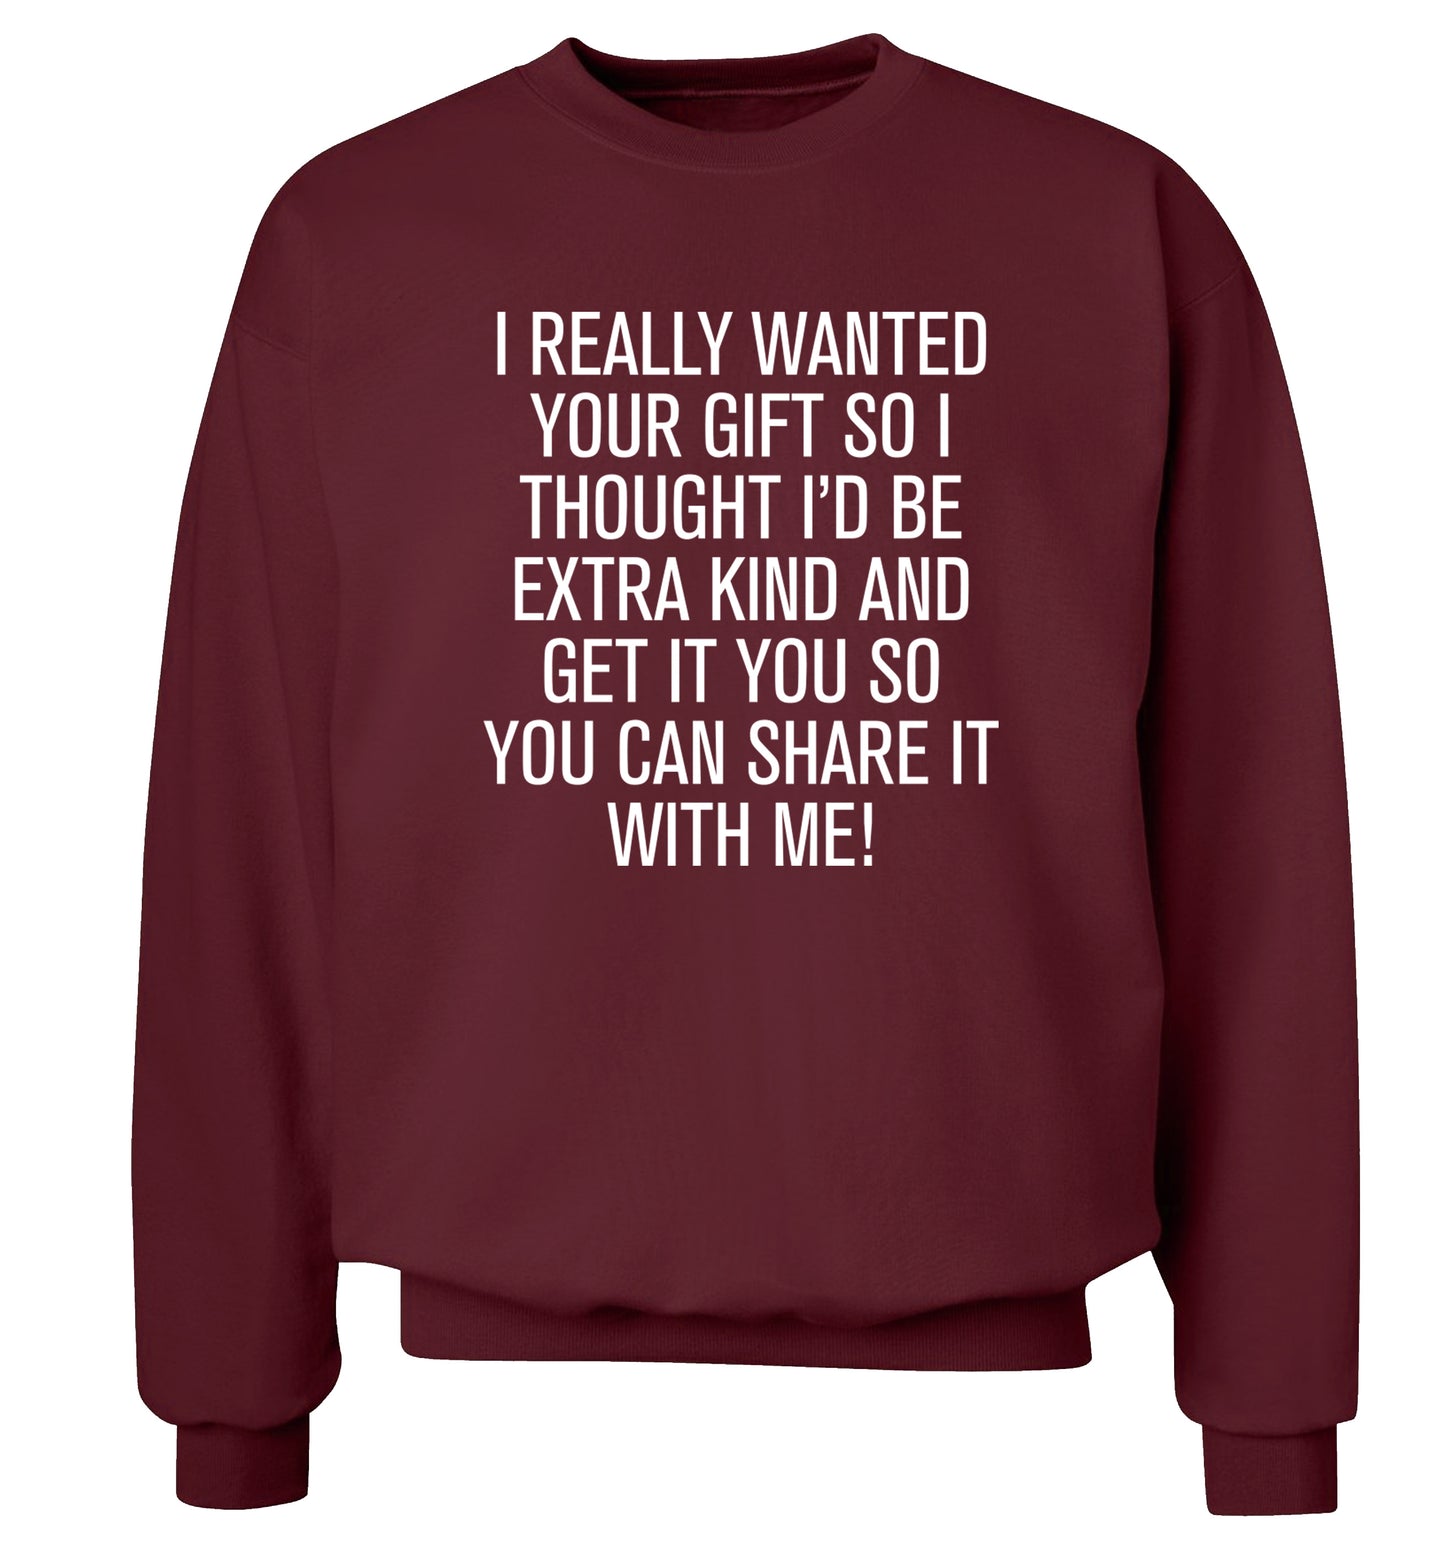 I really wanted your gift Adult's unisex maroon Sweater 2XL